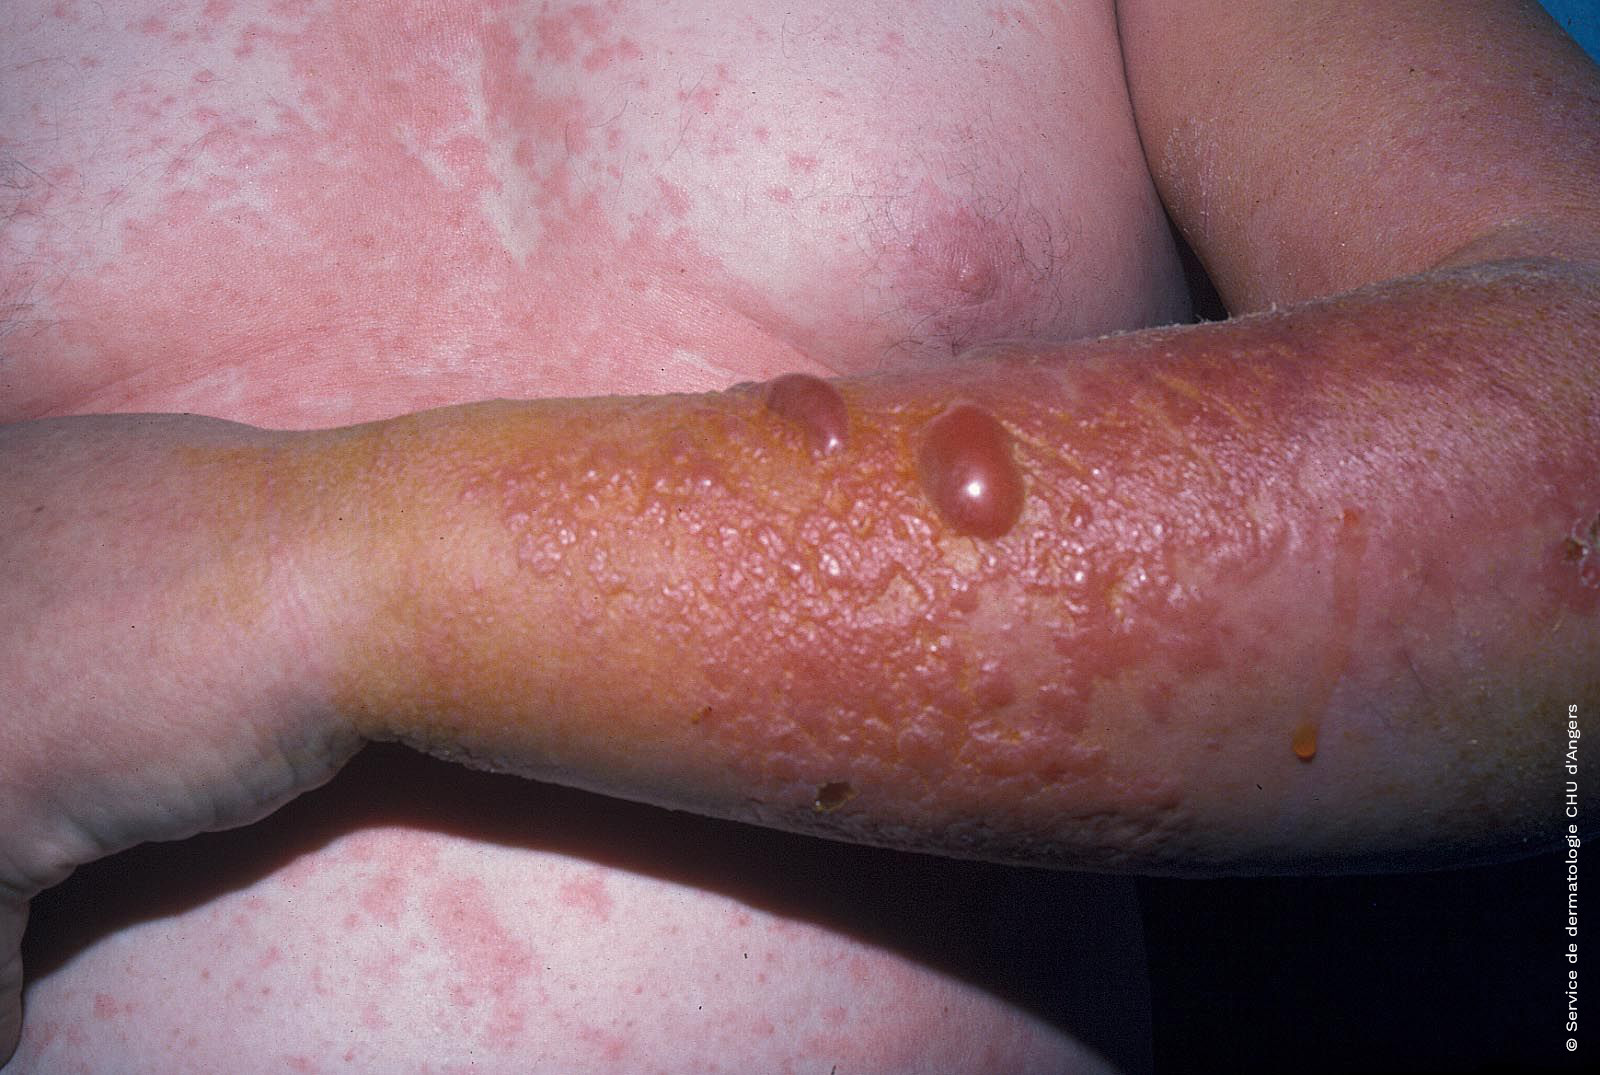 Bubble arm contact eczema with turpentine diffusion